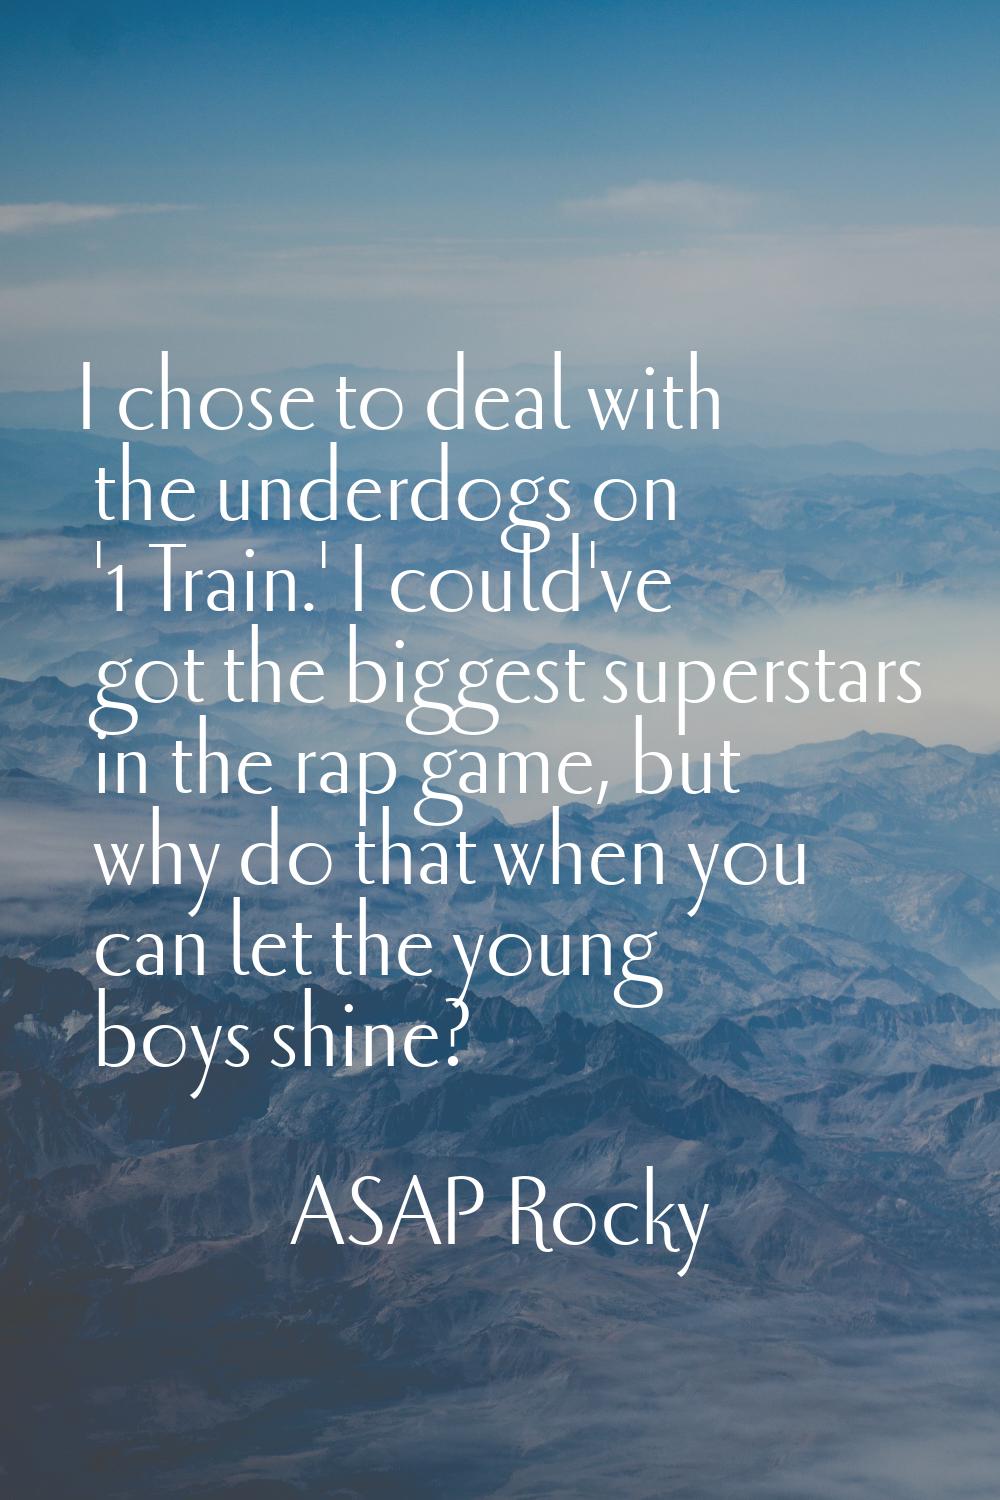 I chose to deal with the underdogs on '1 Train.' I could've got the biggest superstars in the rap g